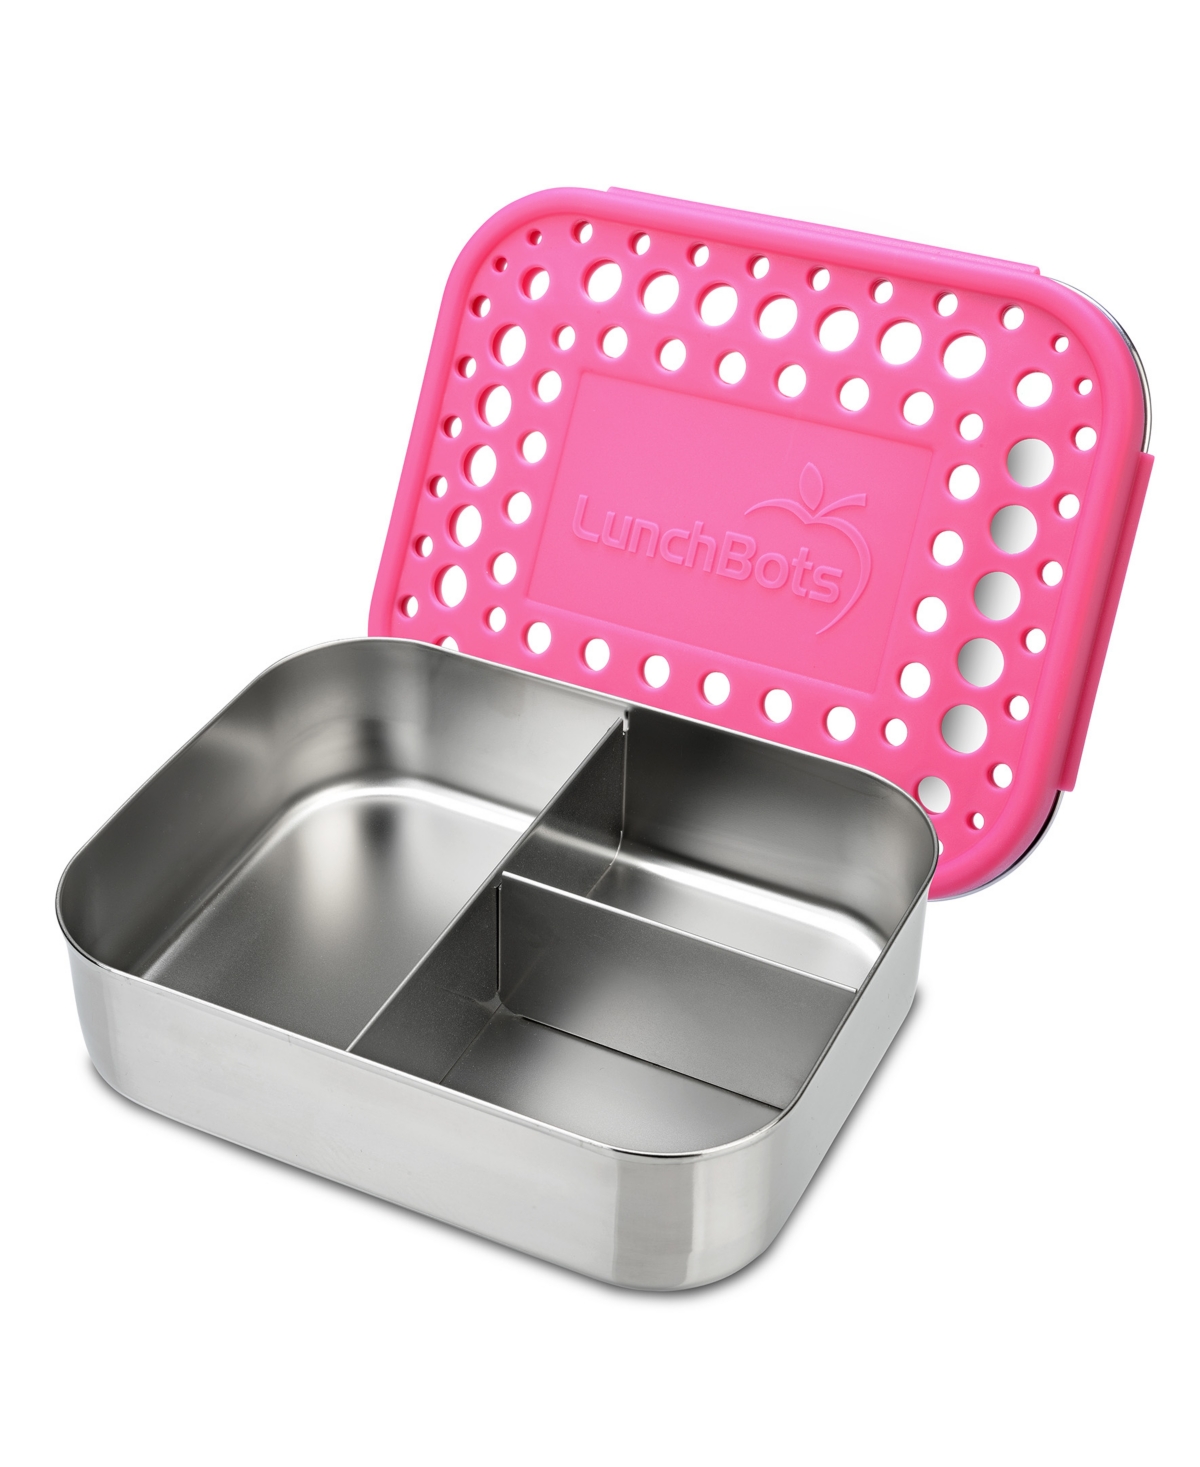 Lunchbots Stainless Steel Bento Lunch Box 3 Sections In Pink Dots